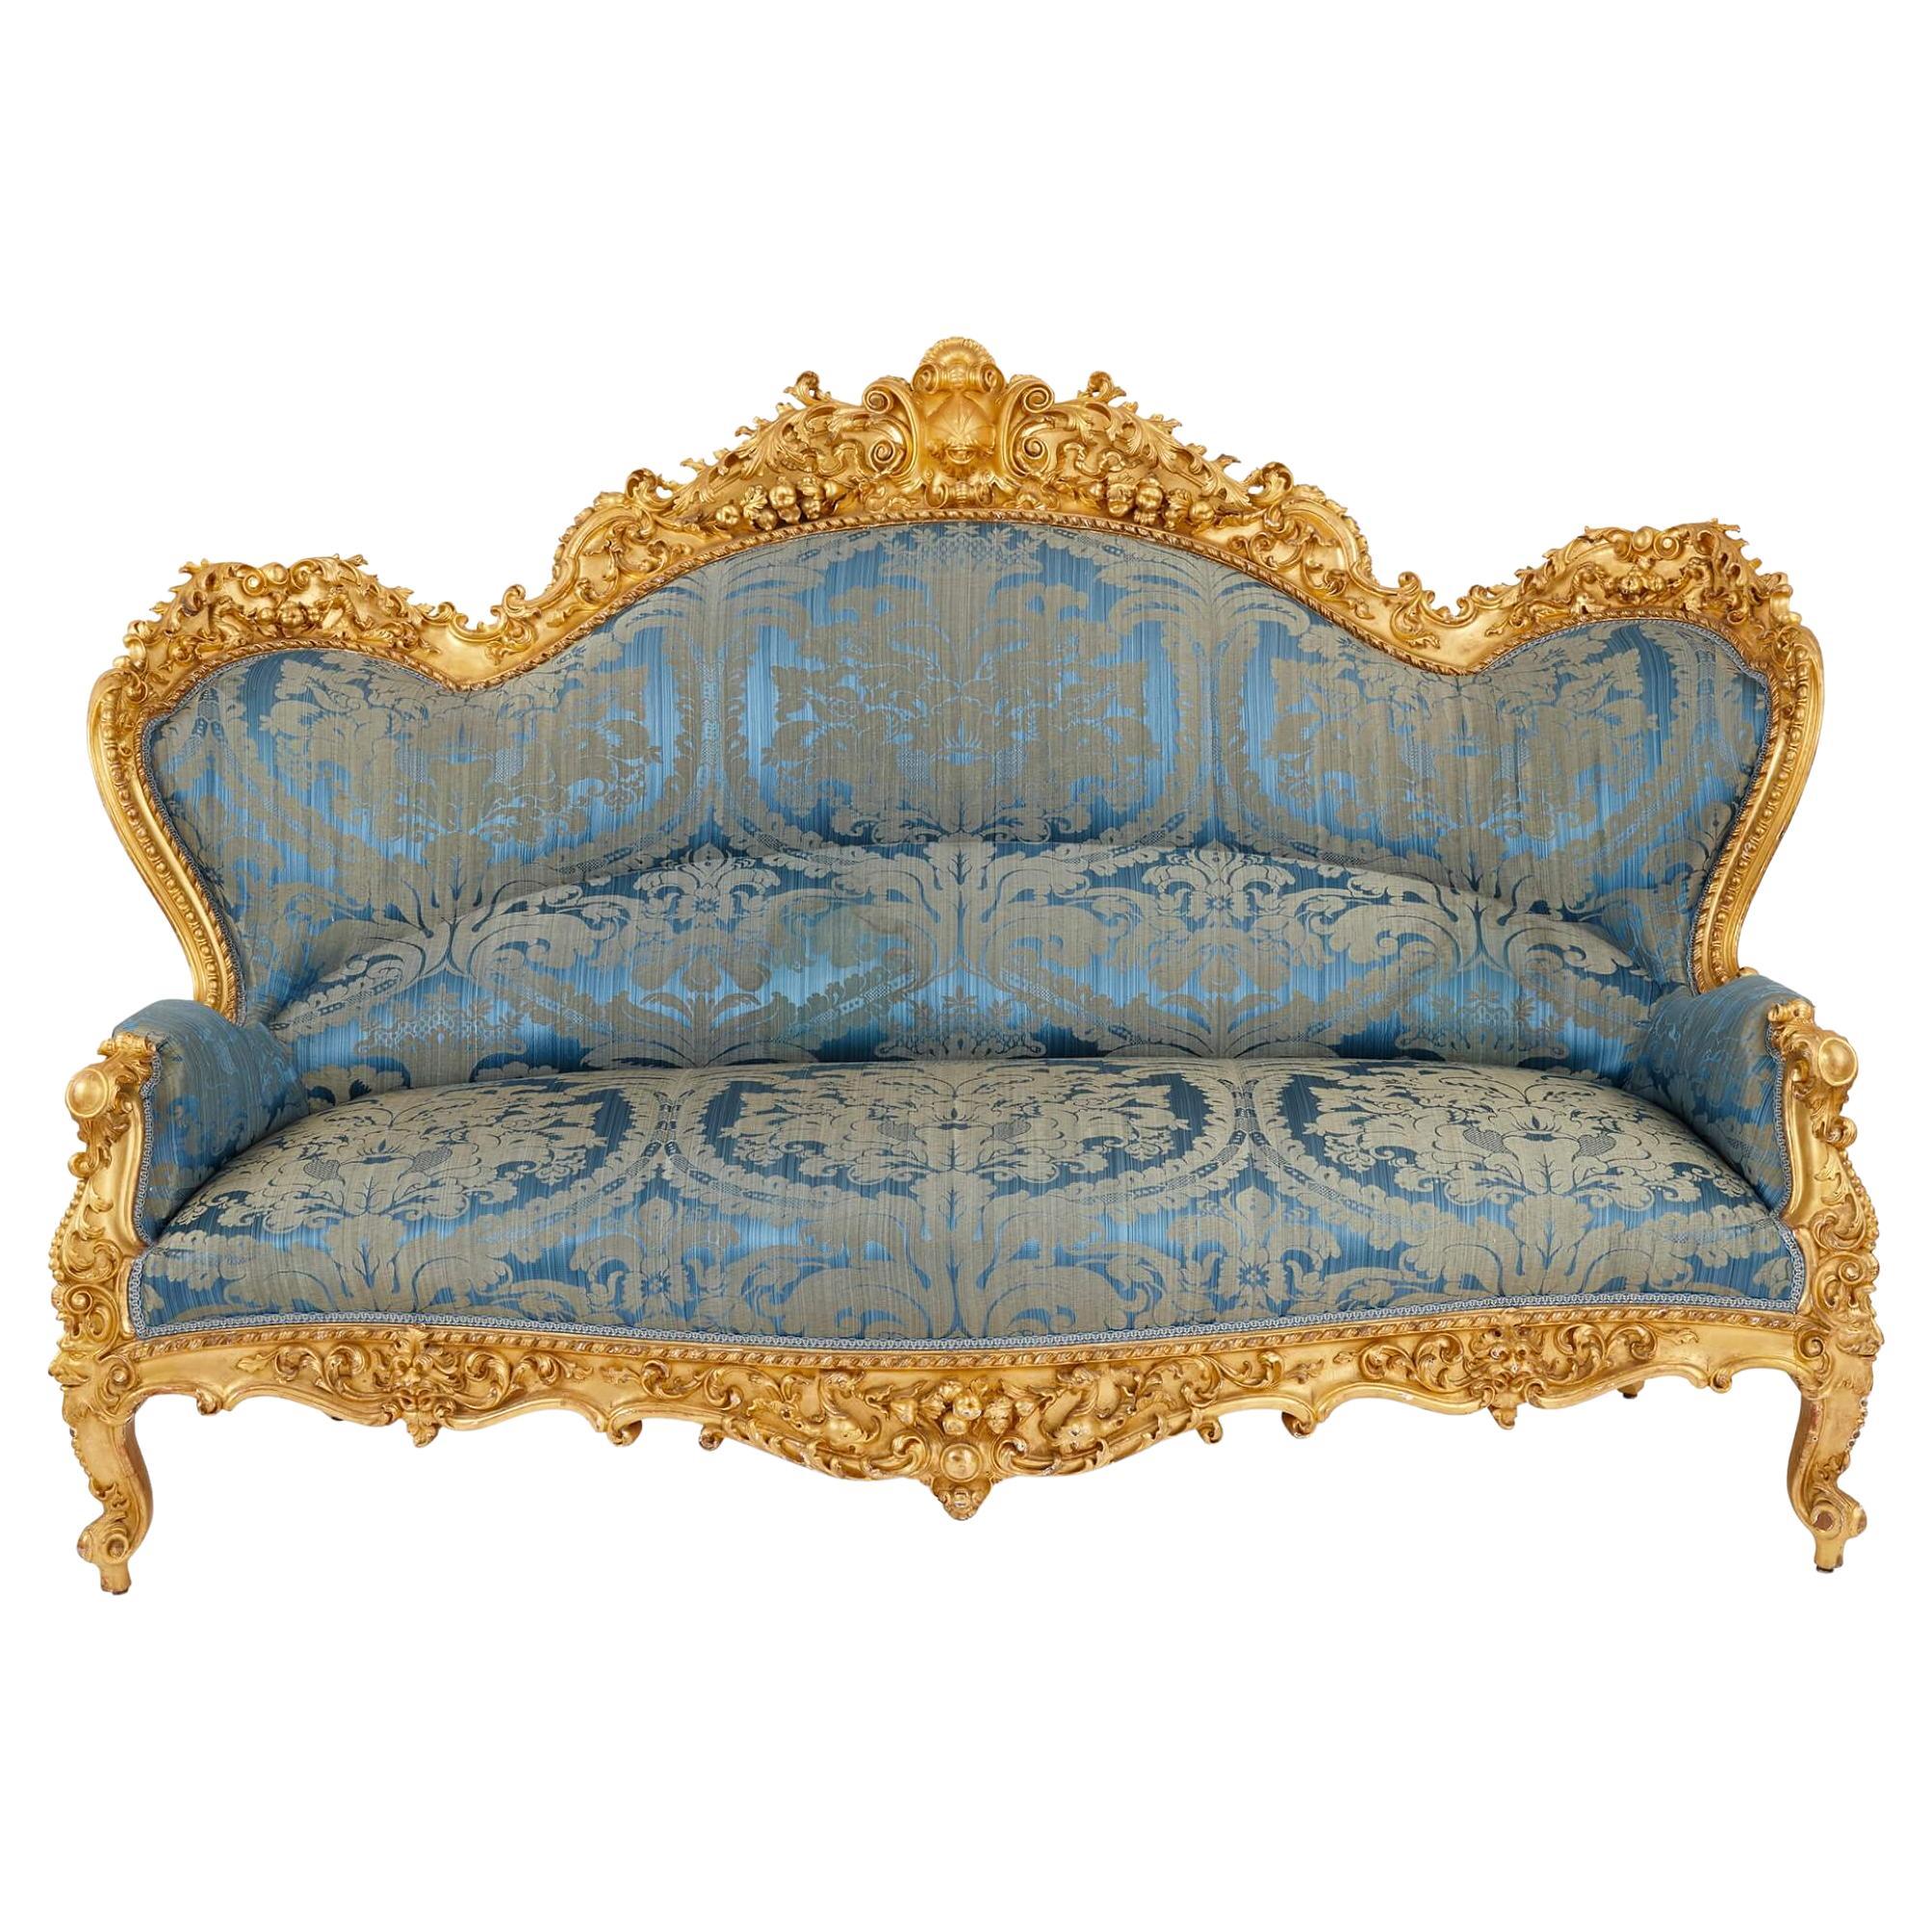 Large French Rococo Revival Style Giltwood Sofa For Sale